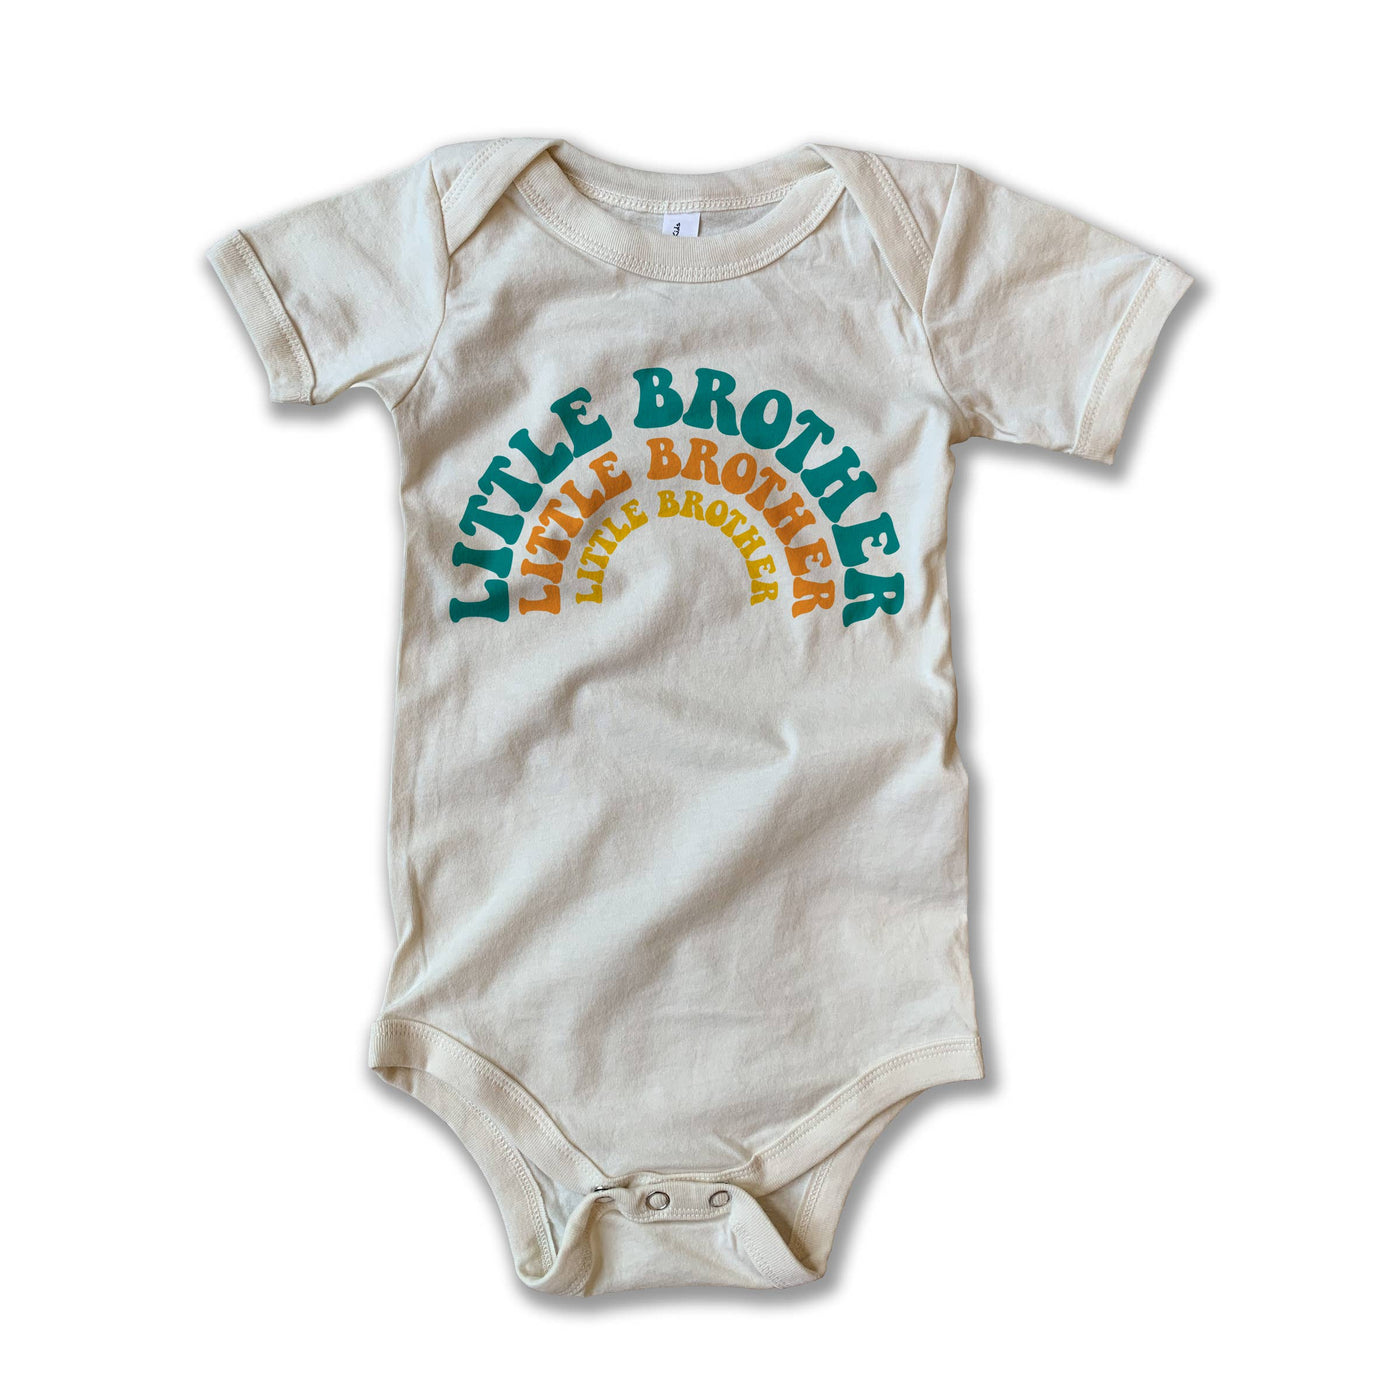 Rivet Apparel Co. - Little Brother Tees & Onesies - Two Little Birds Boutique